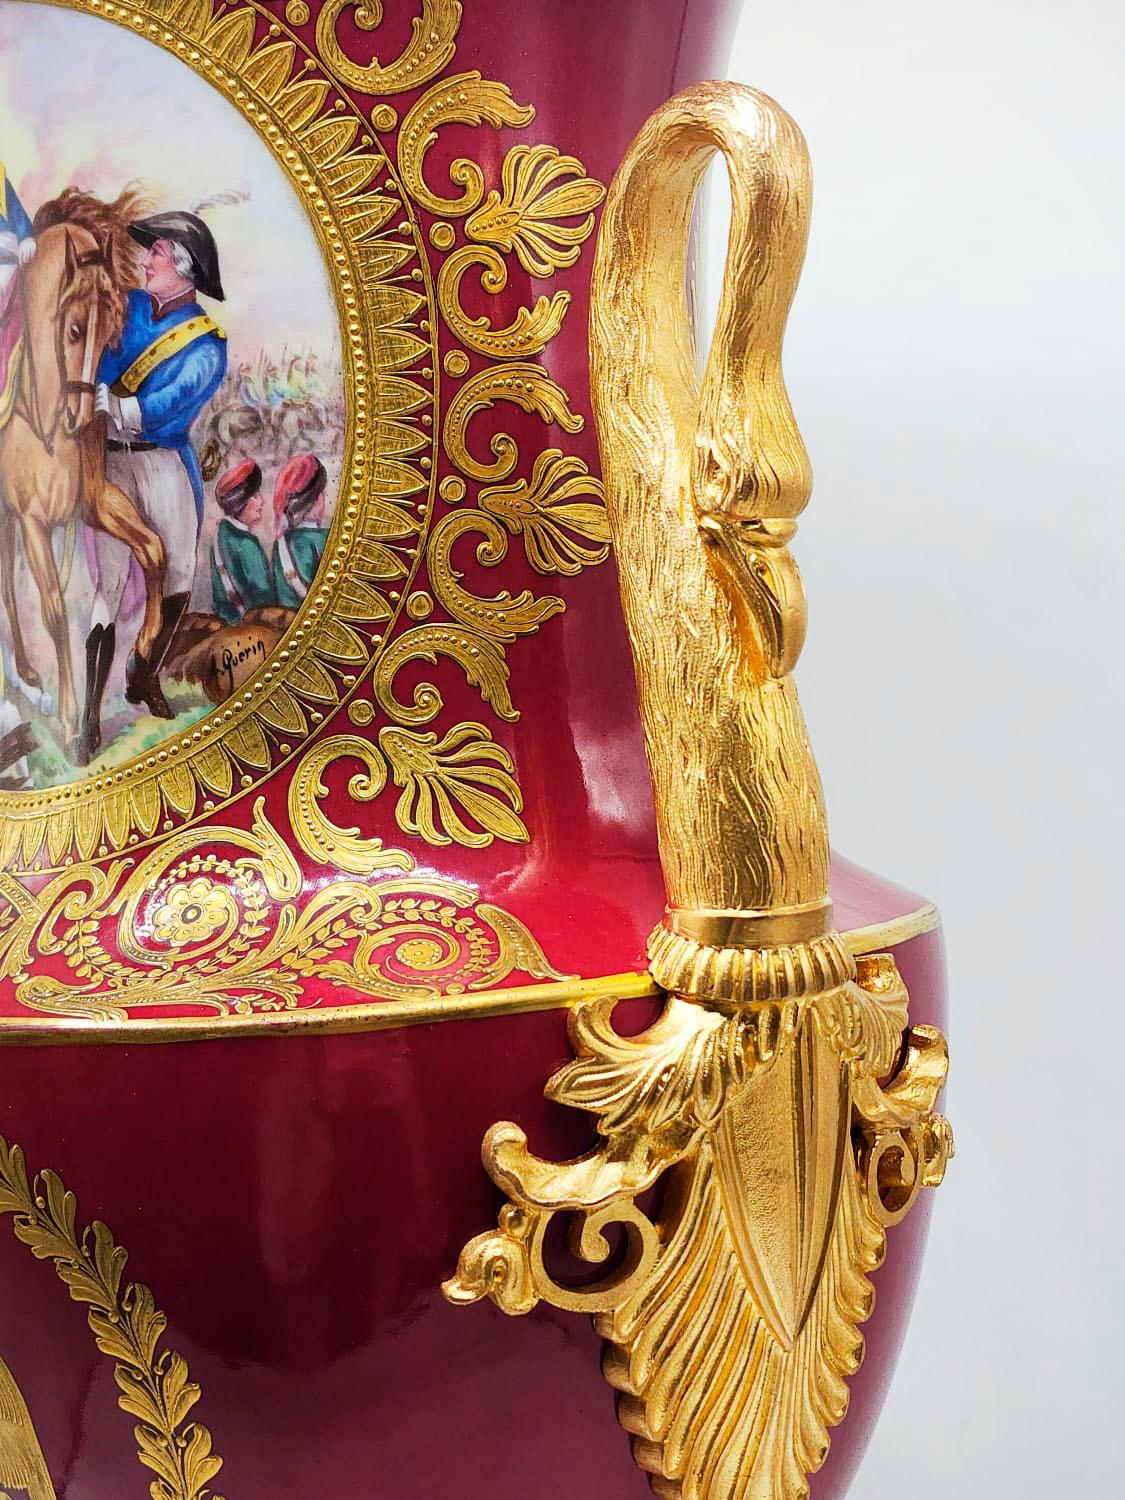 French porcelain vase Napoleonic Empire 19th century

Extravagant pink French porcelain vase with flamingo handles, base with flamingo leg design and paintings on both fronts, signed A.Querin.
The vase has a restoration in the mouth done by